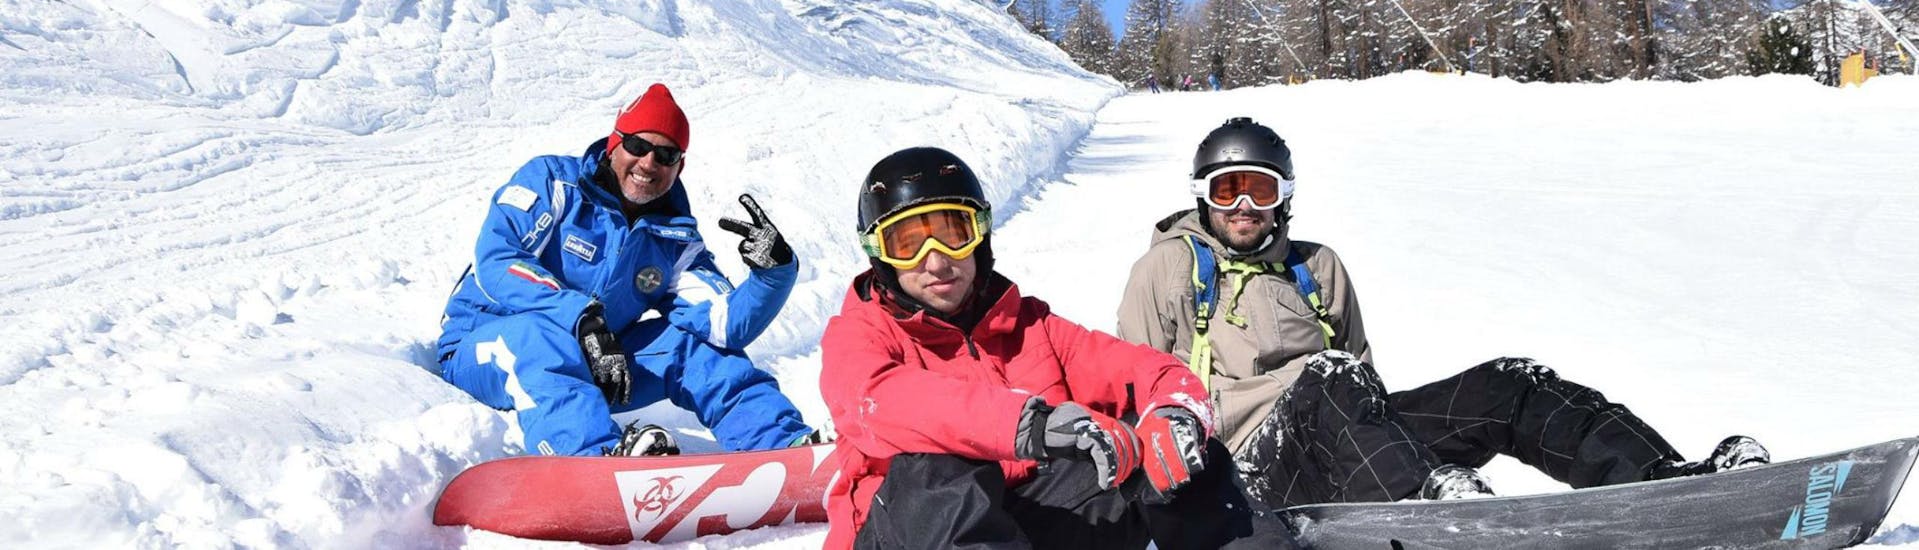 Two snowboarders and their instructor are taking a short break from their Snowboarding Lessons for Kids & Adults - Low Season organised by the ski school Scuola di Sci e Snowboard Livigno Italy.